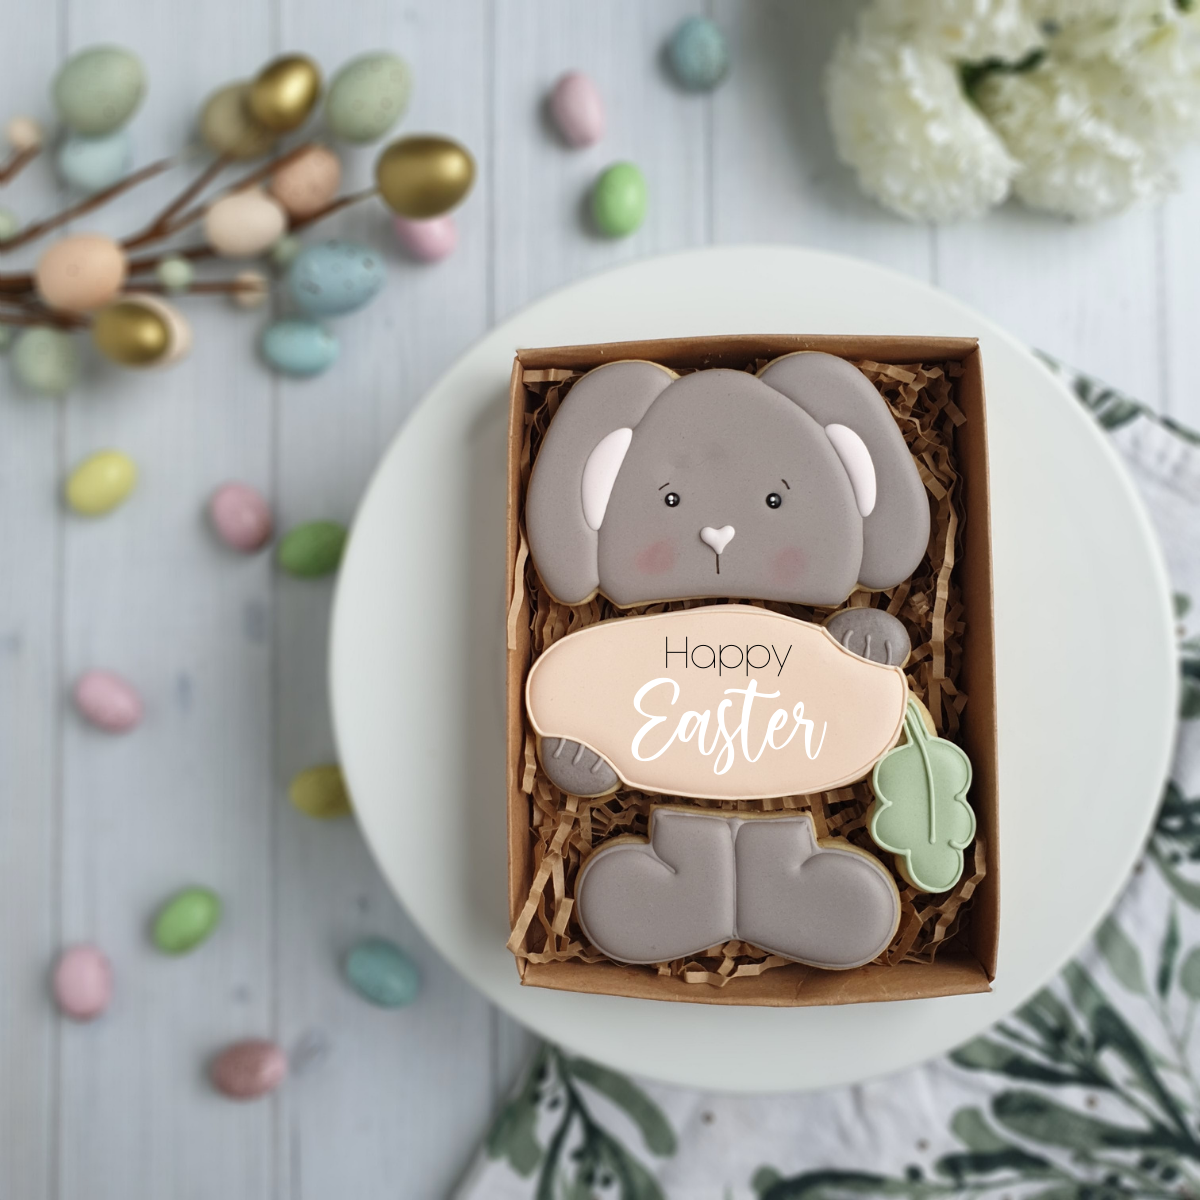 Happy Easter Bunny 2021 - Cookies by Qui Geelong.png